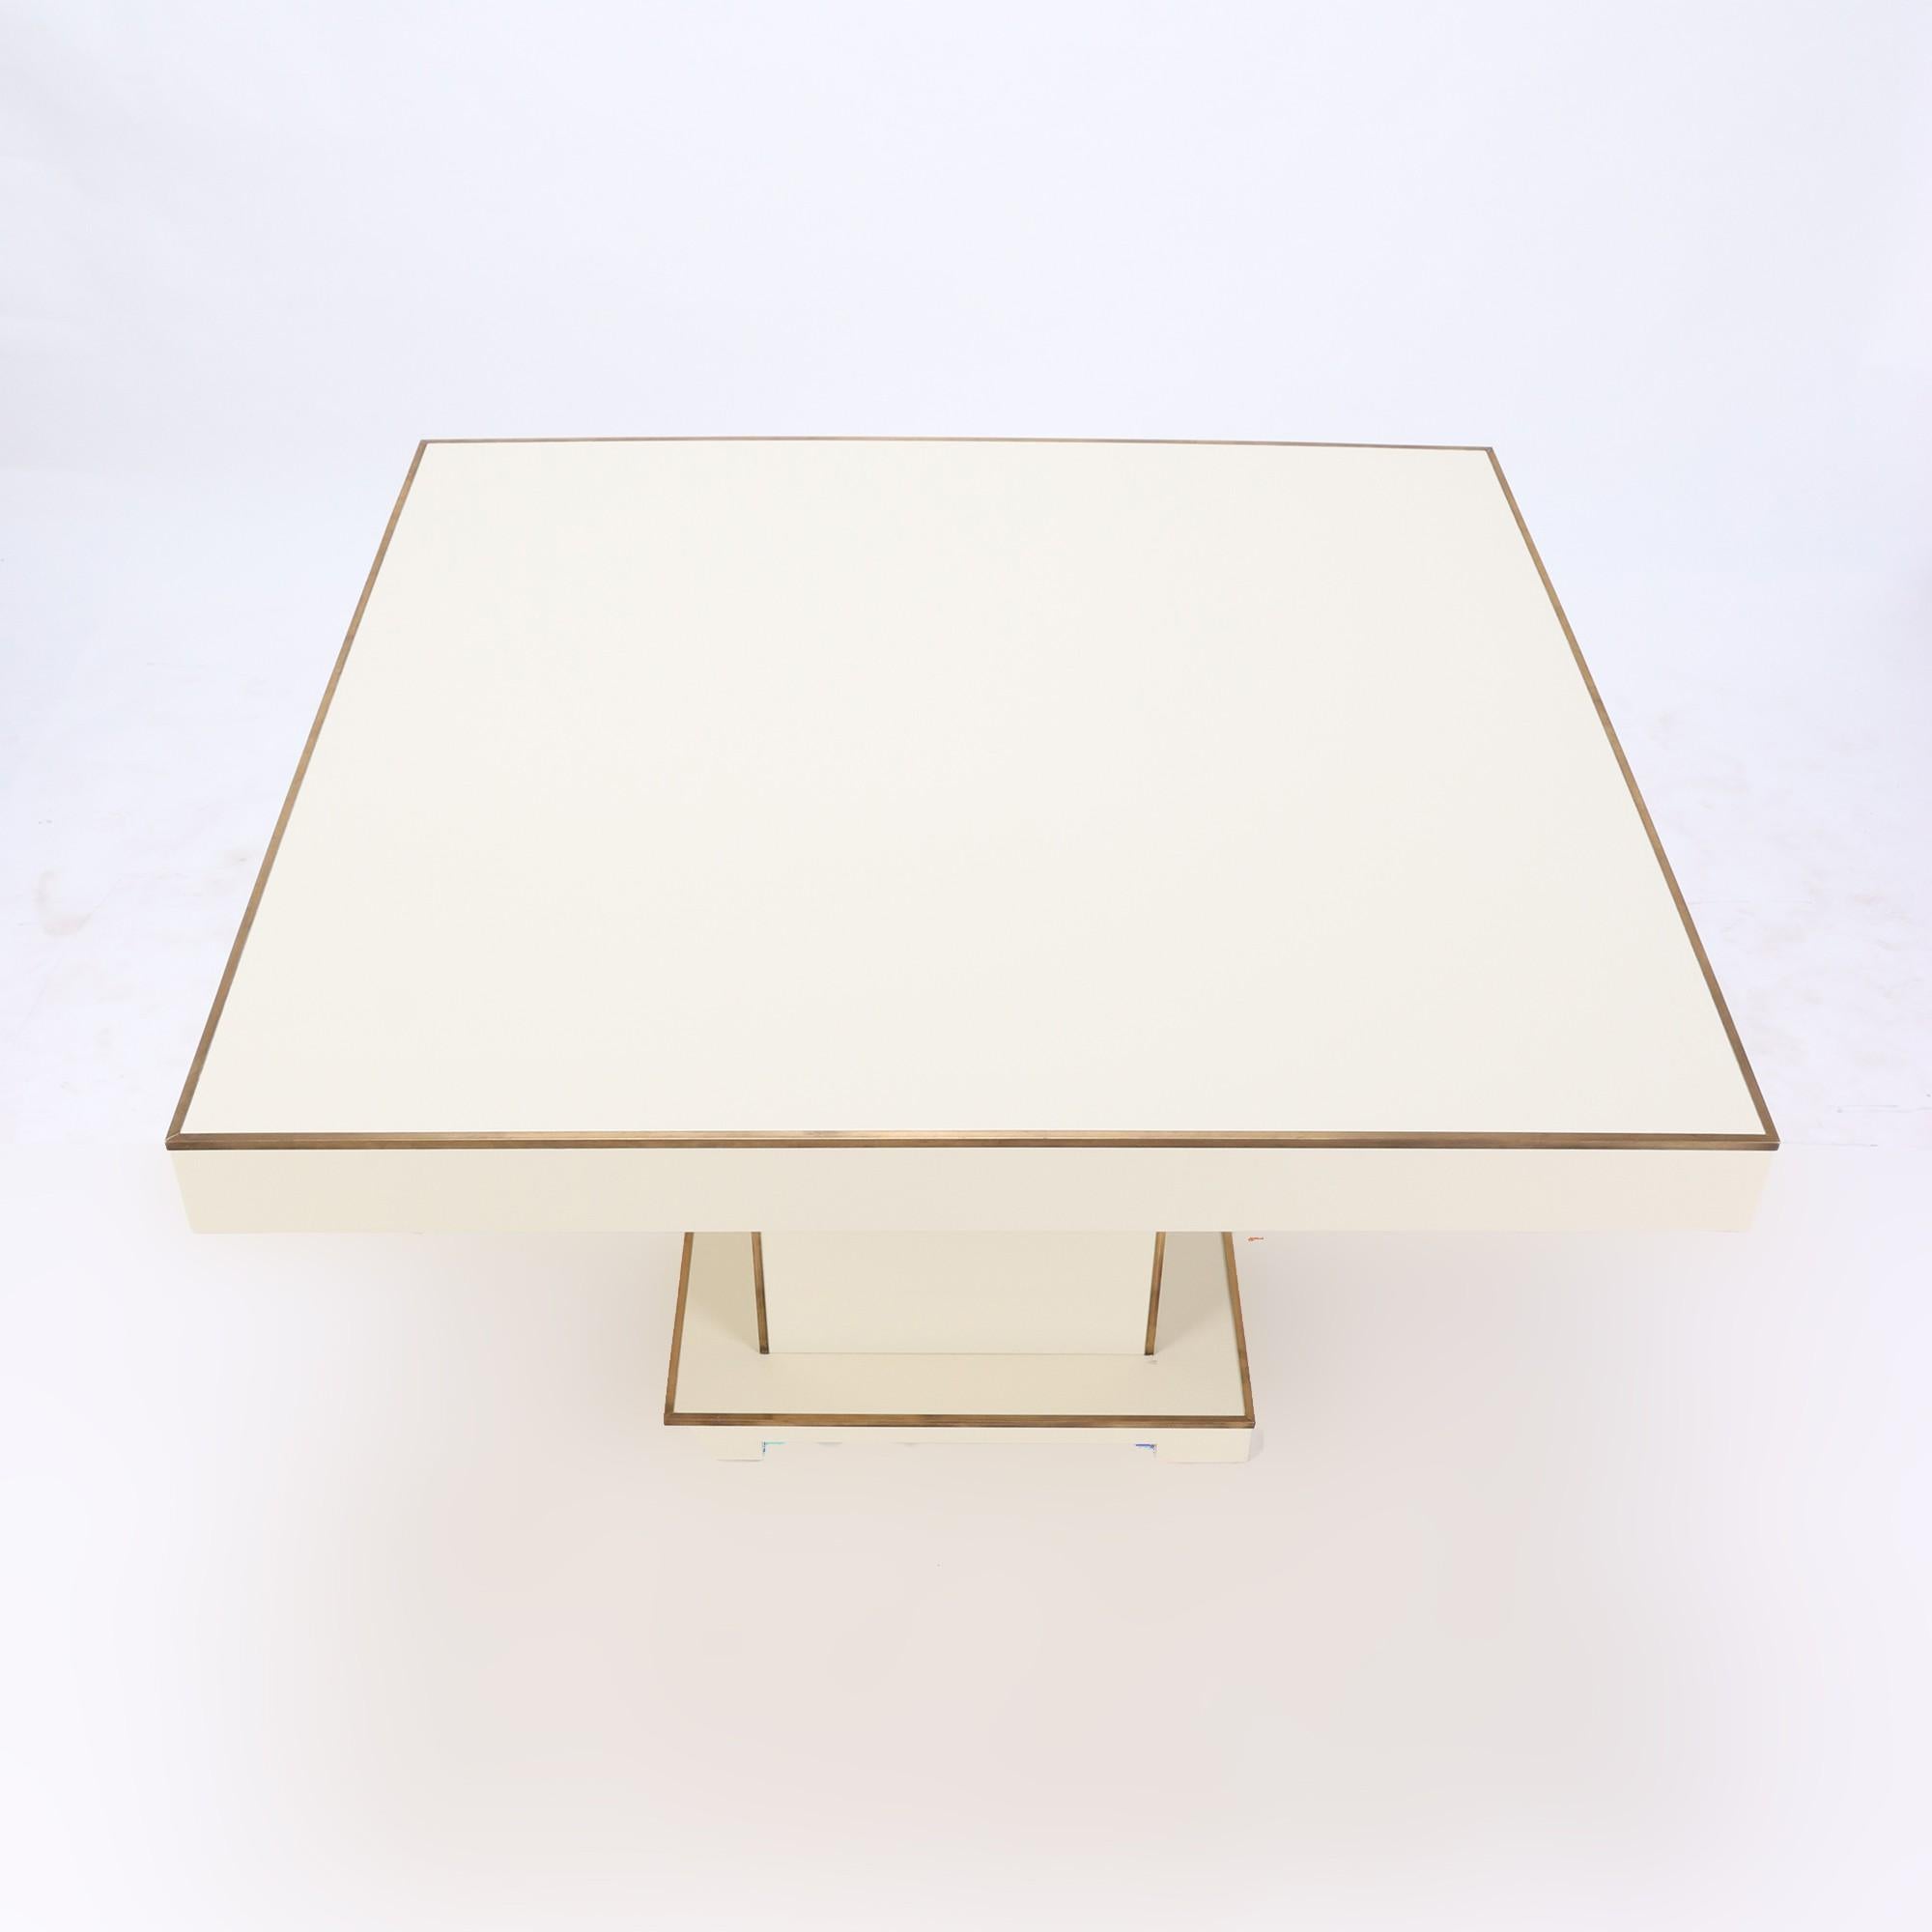 A French Maison Jansen lacquer pedestal table with brass trim details, circa 1970.